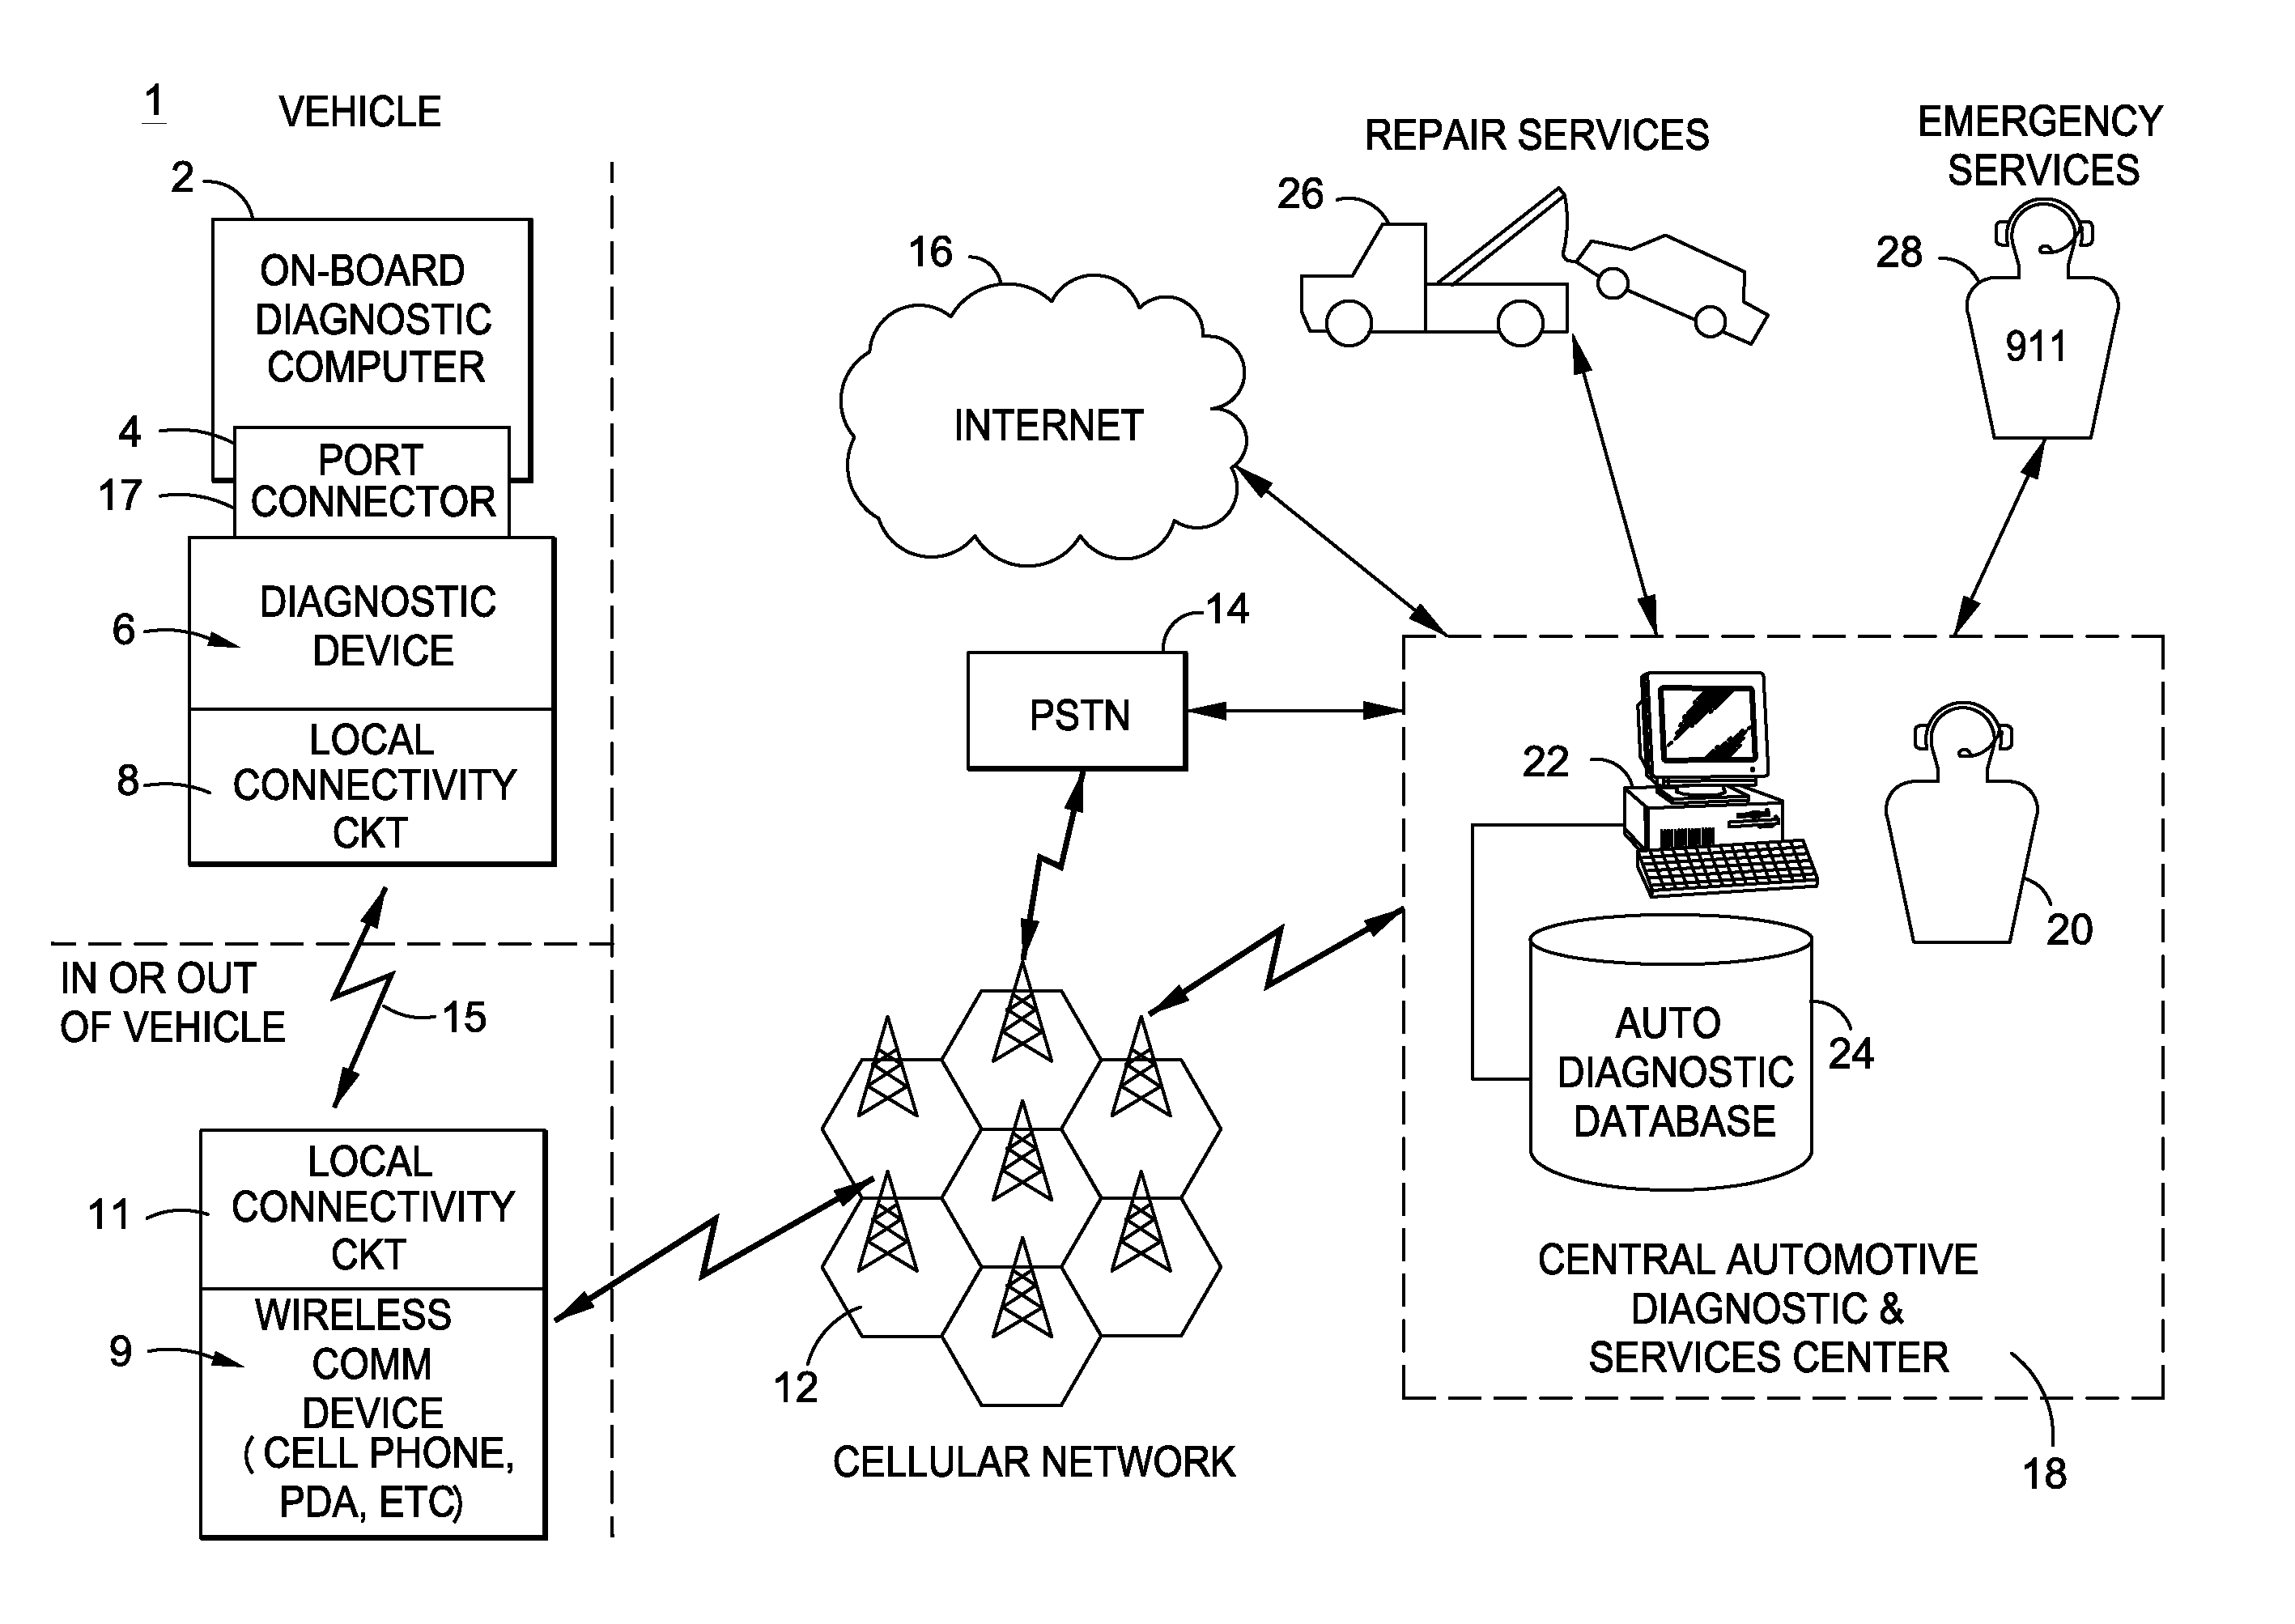 Mobile device based vehicle diagnostic system